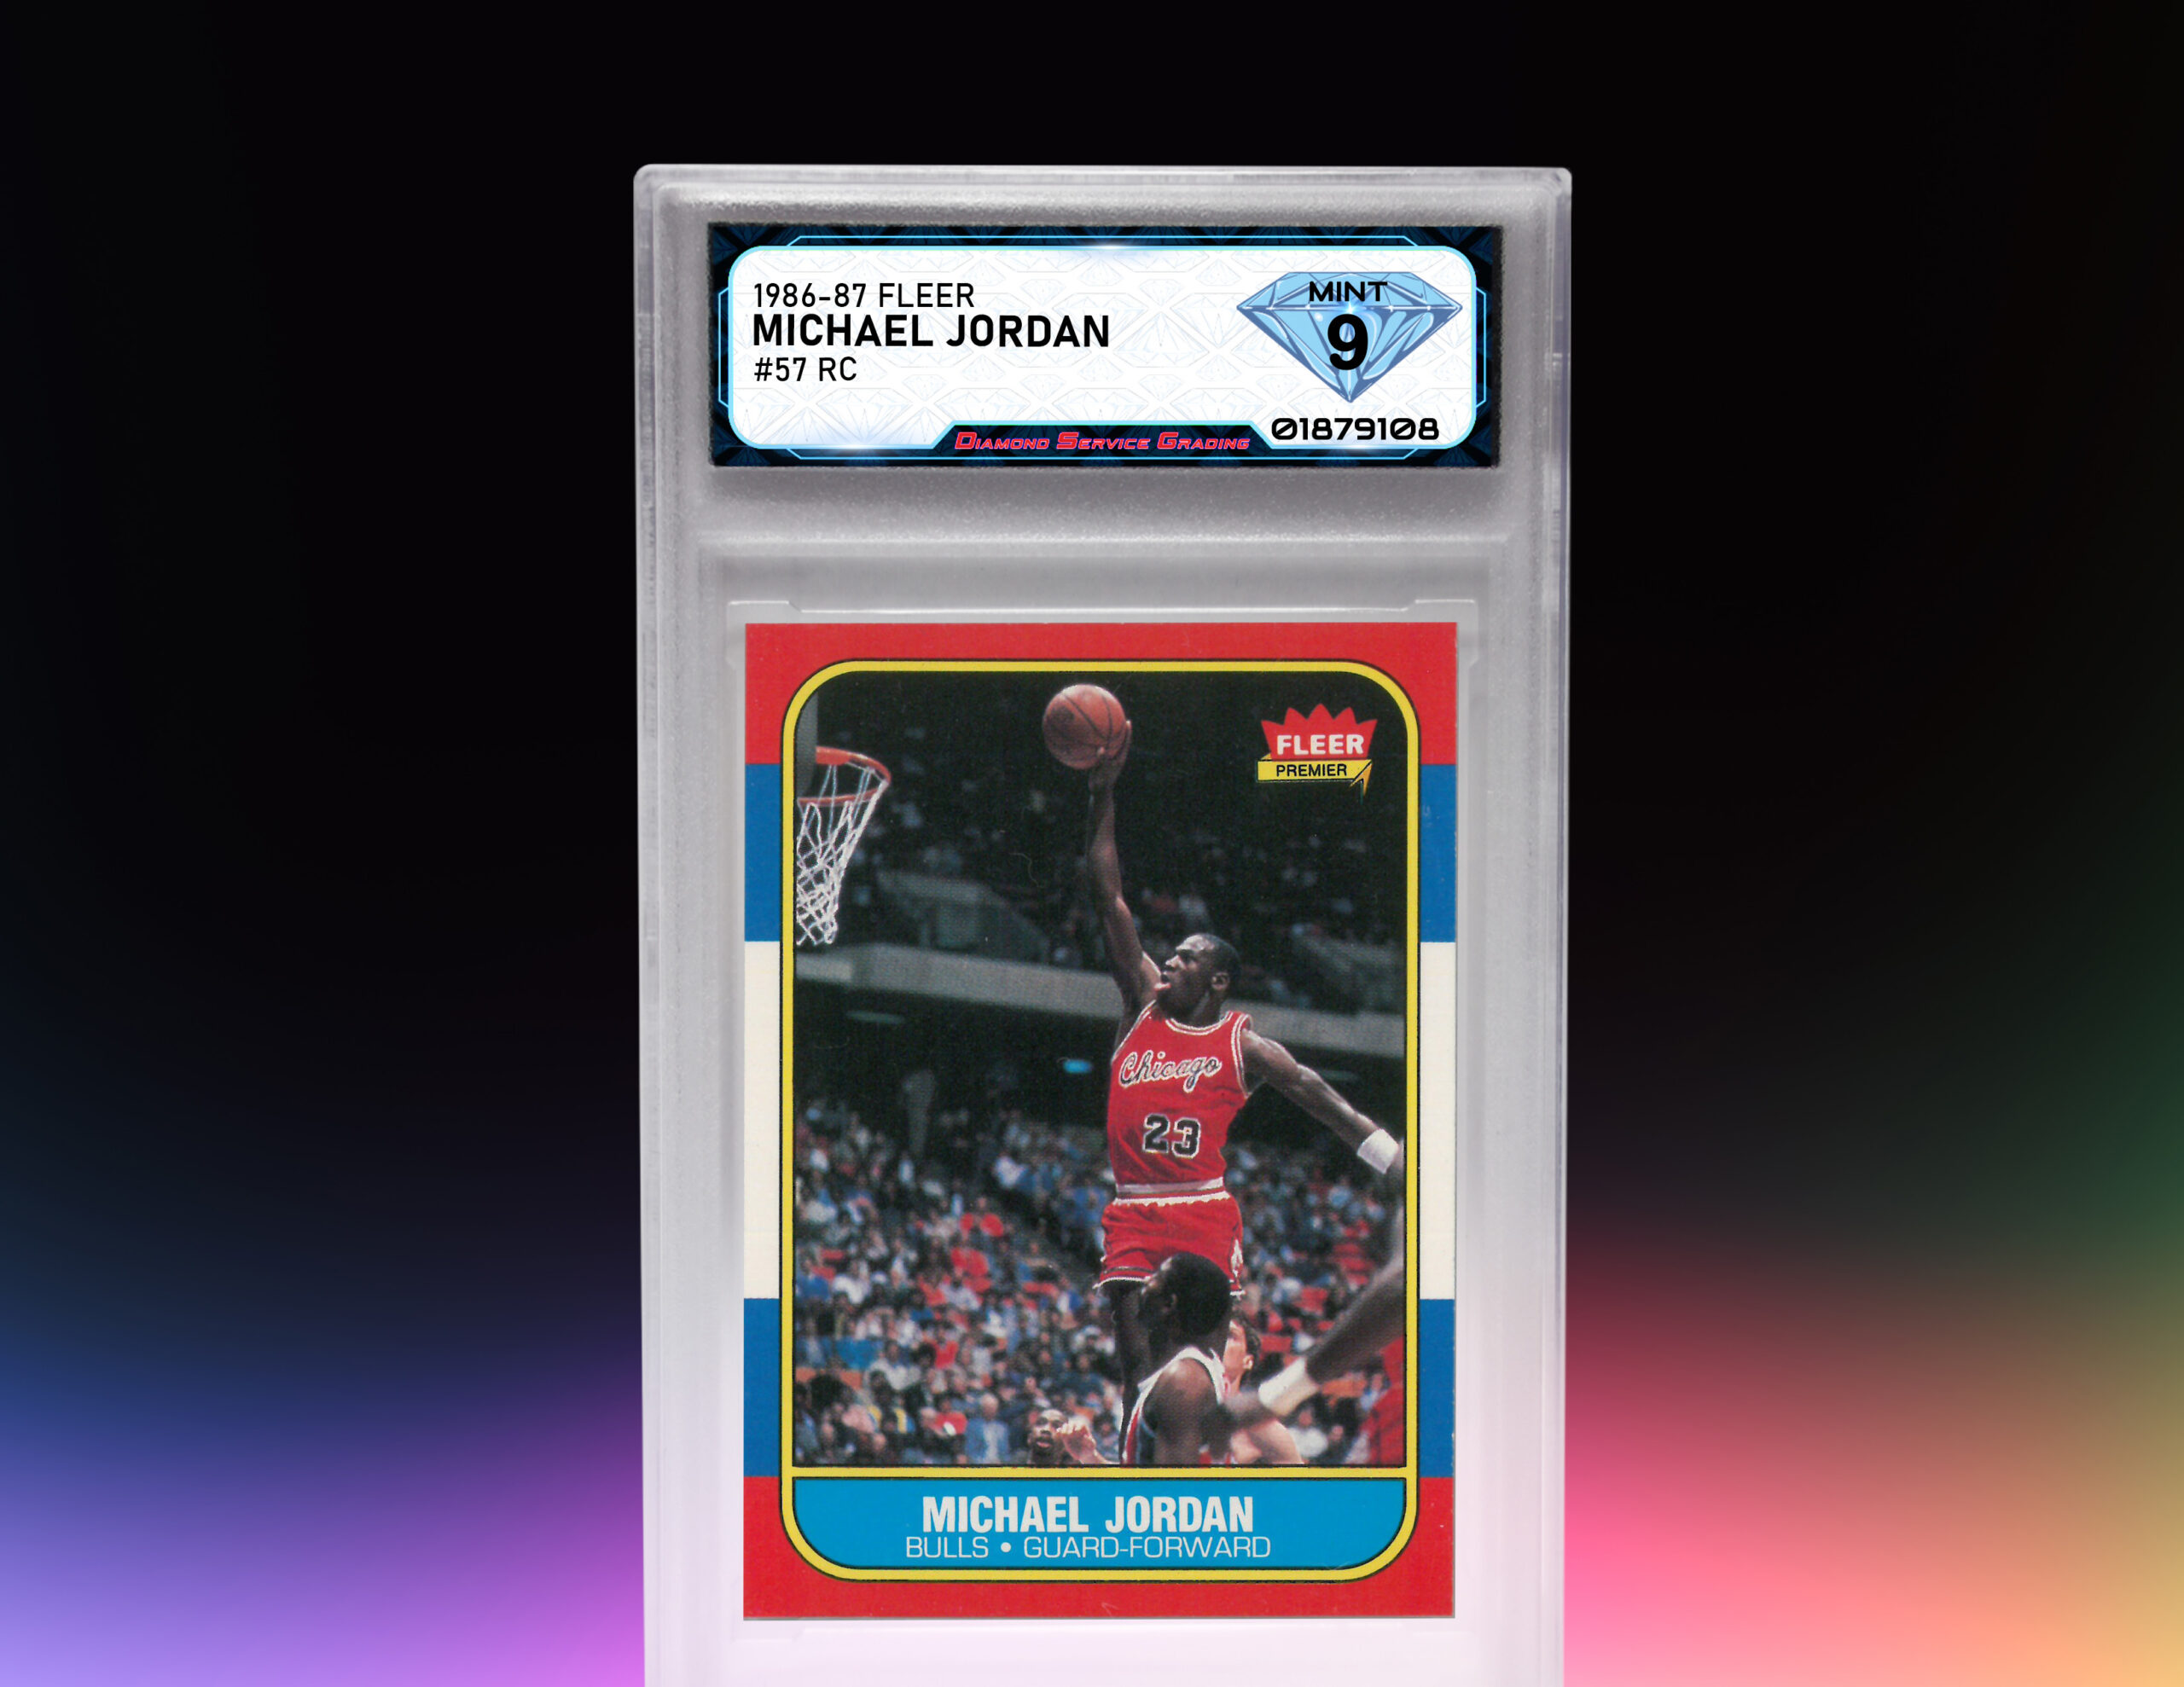 MJ scaled cards